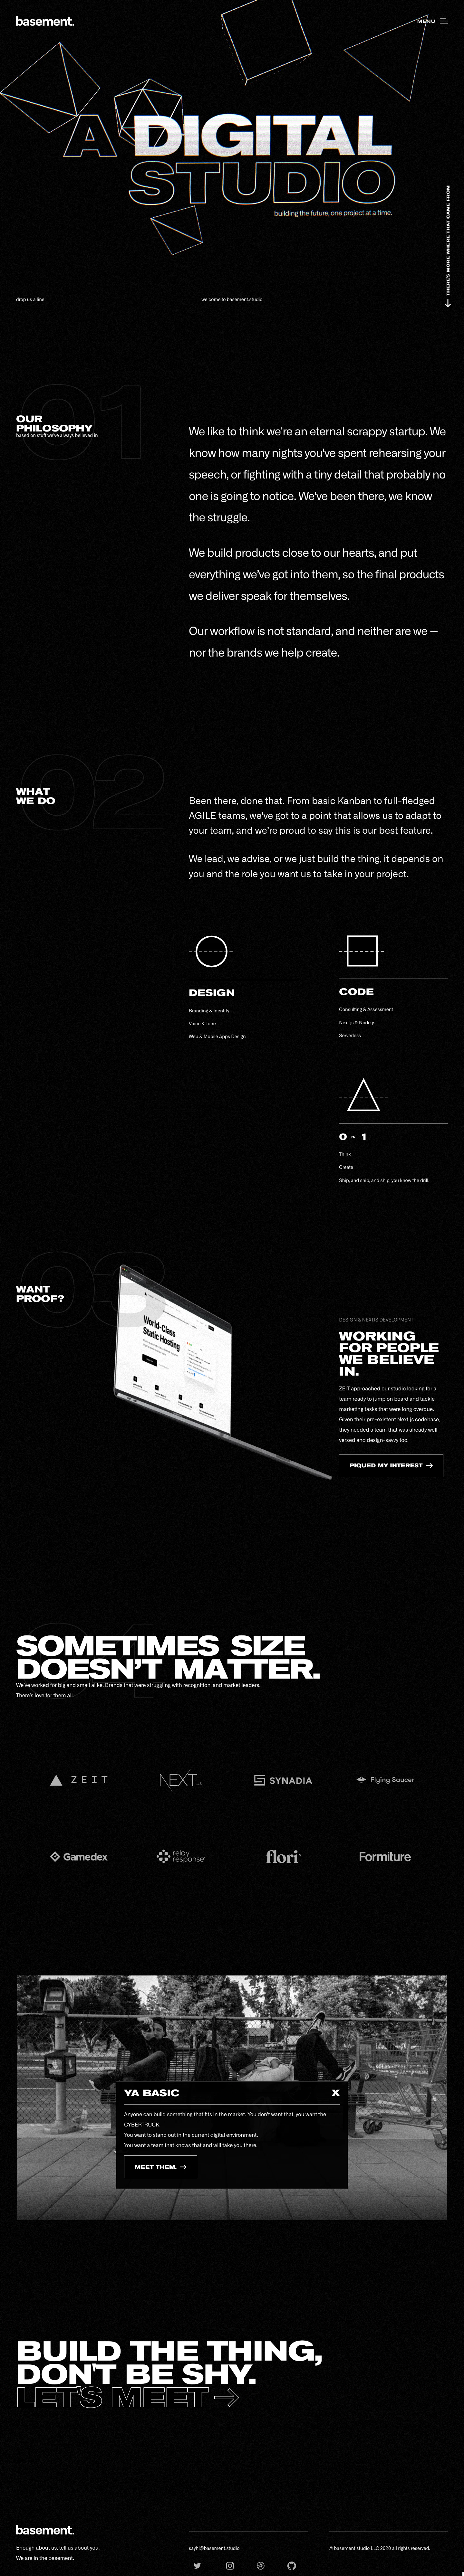 Basement Studio Landing Page Example: We build products close to our hearts, and put everything we’ve got into them, so the final products we deliver speak for themselves.